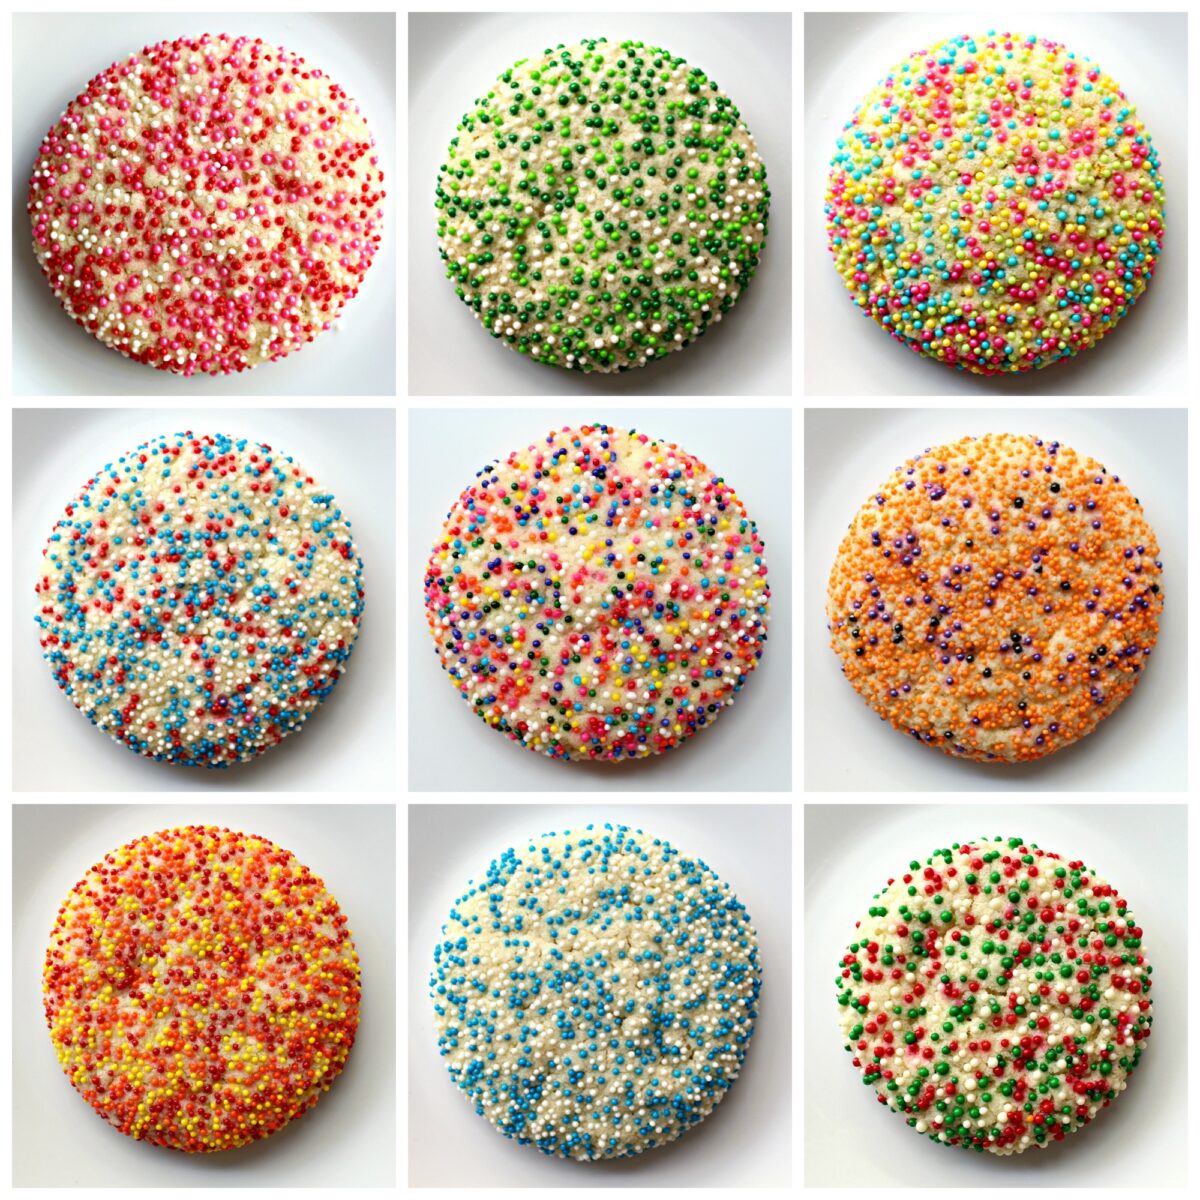 Sprinkle Sugar Cookies coated in different colored sprinkles for a year of different holidays.